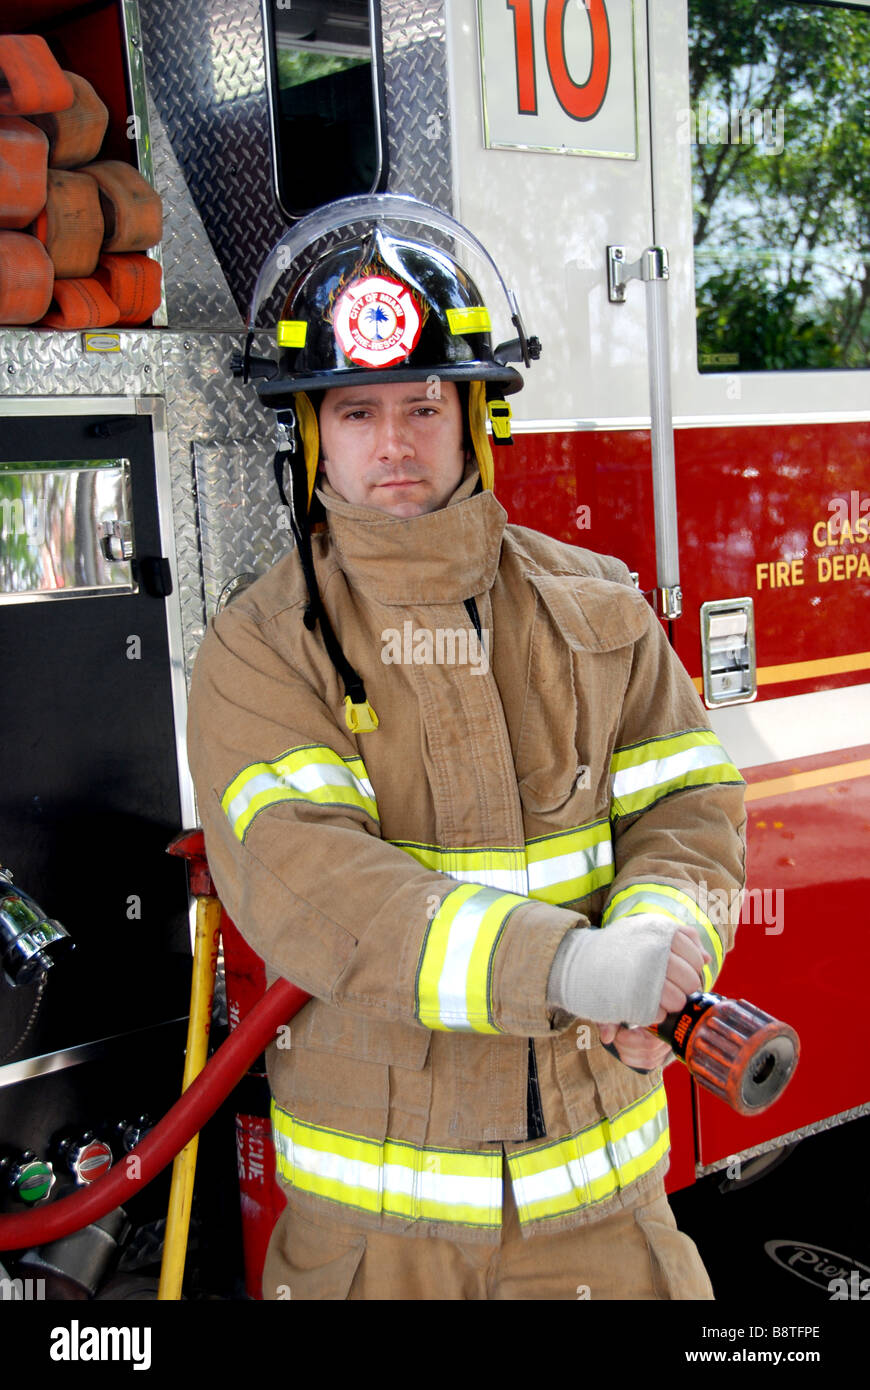 Male Firefighter  holding fire  hose in front of fire  truck  